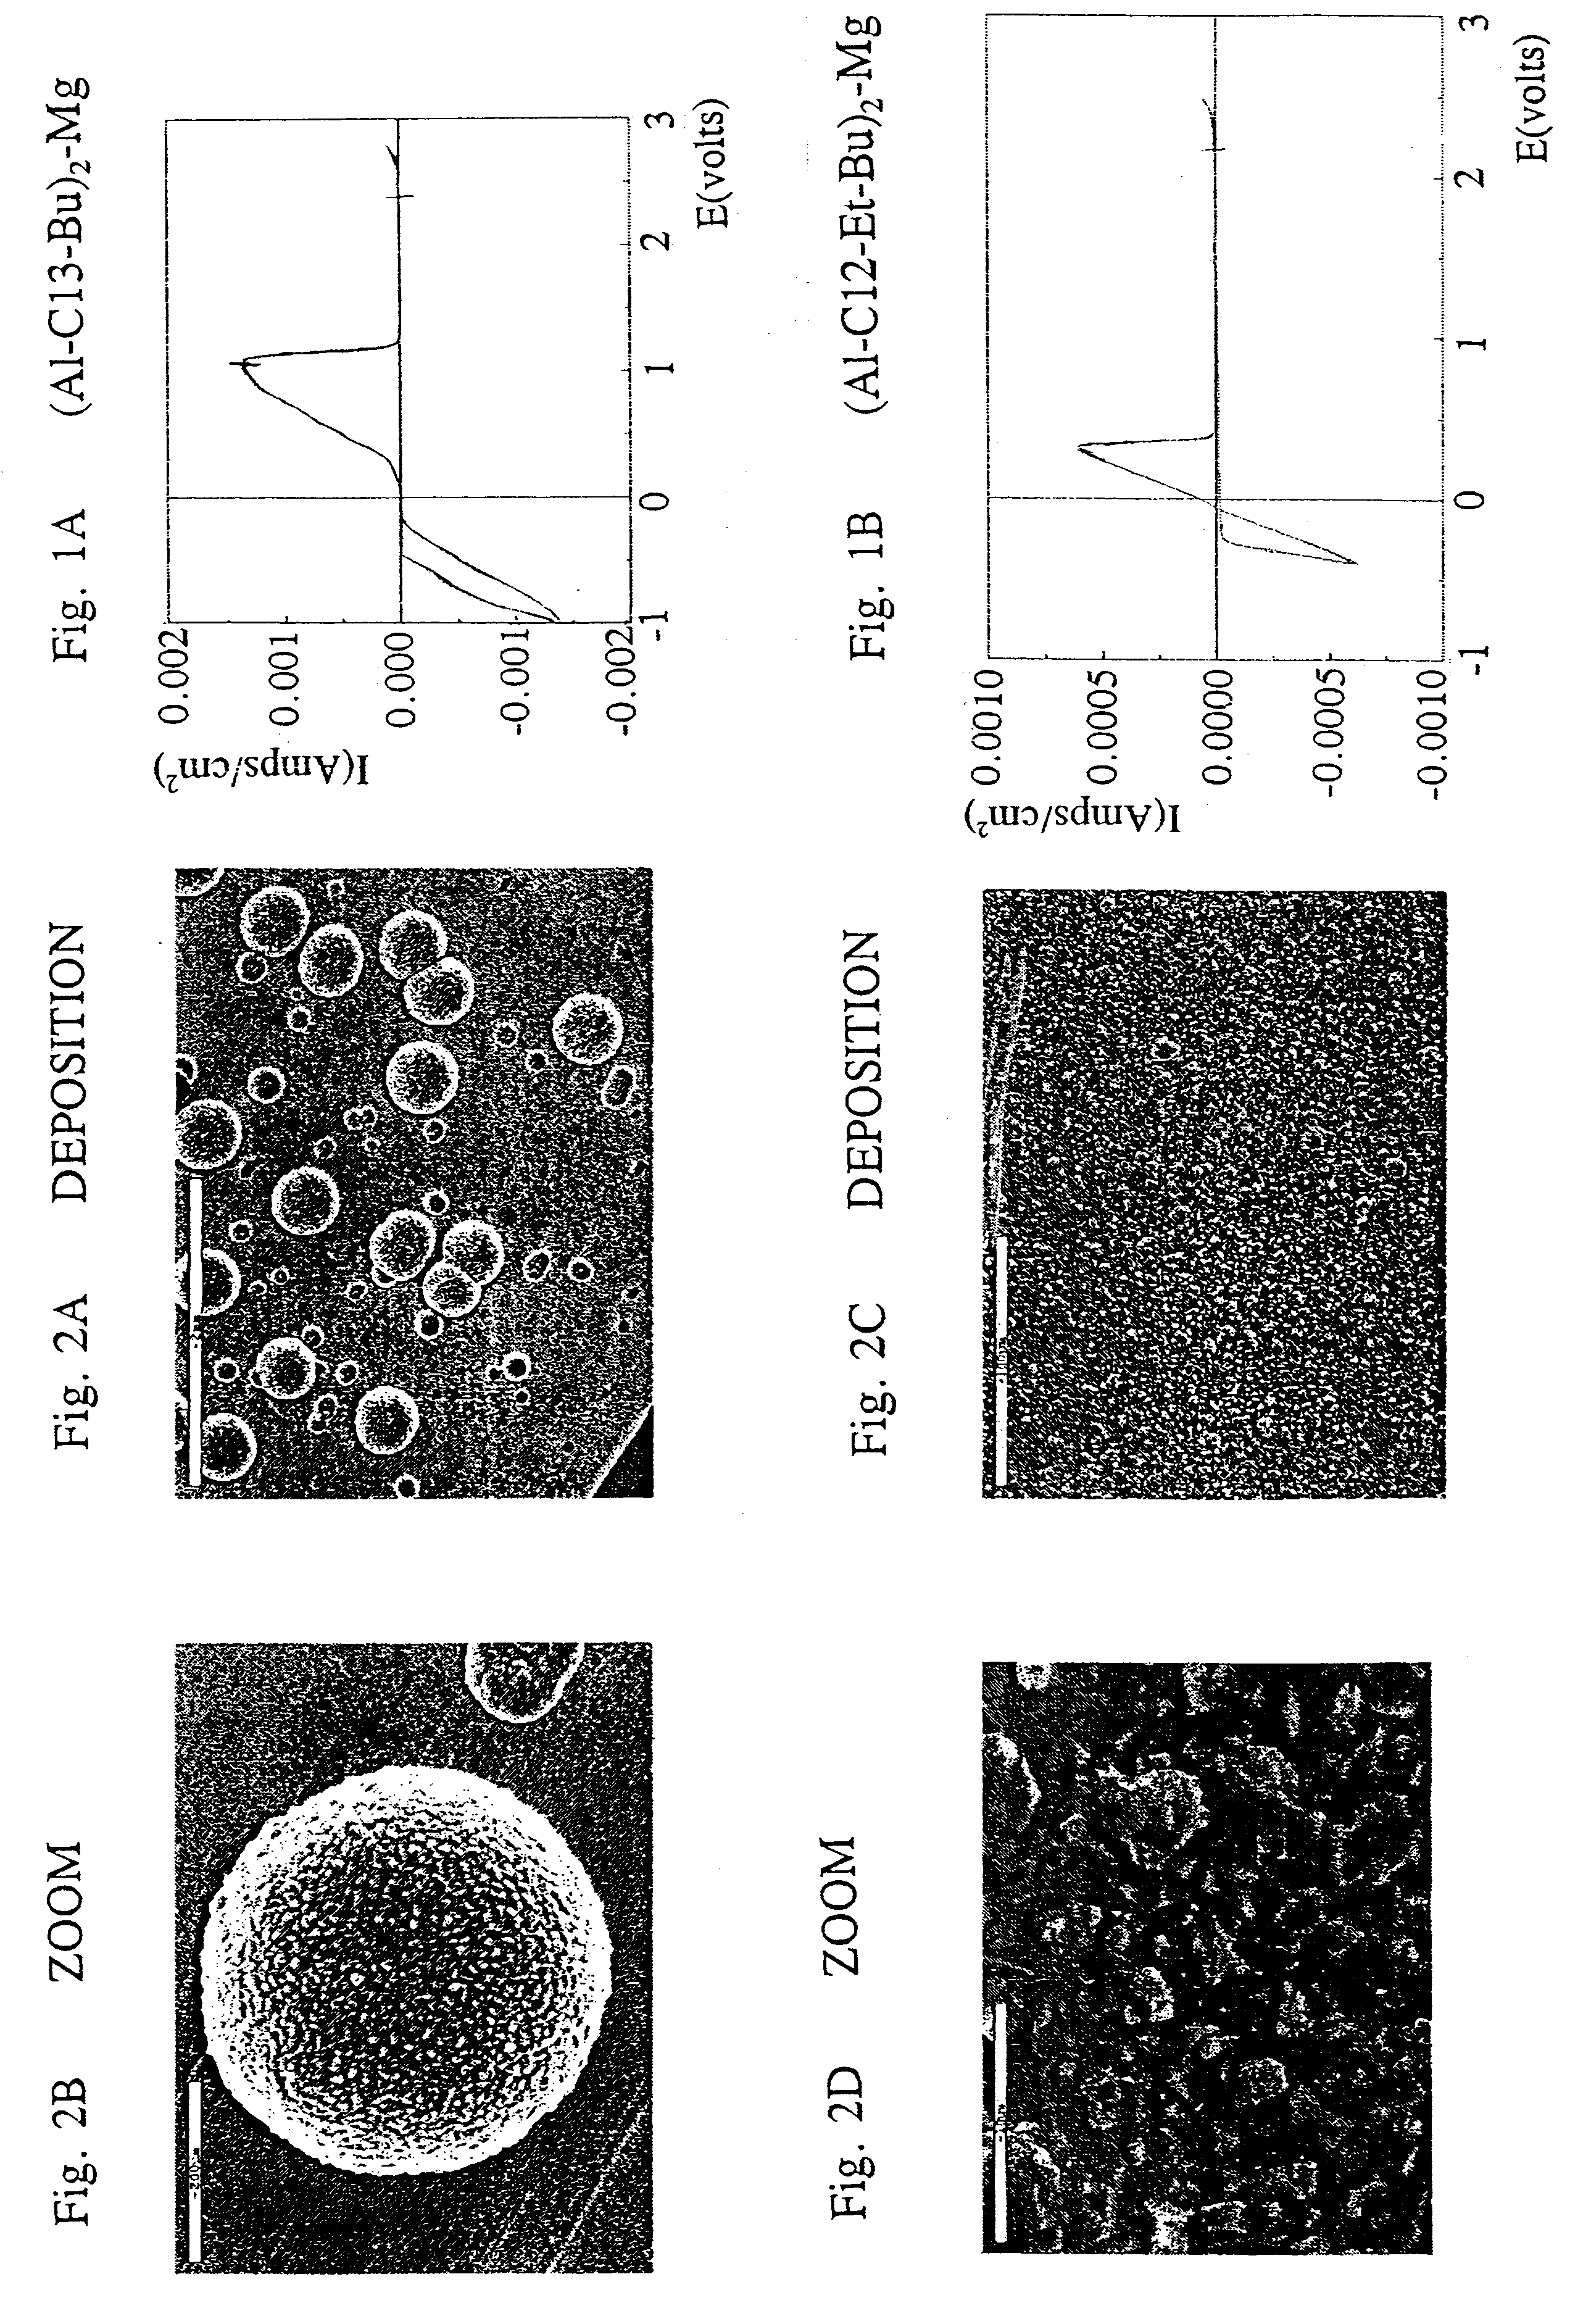 High-energy, rechargeable, electrochemical cells with non-aqueous electrolytes